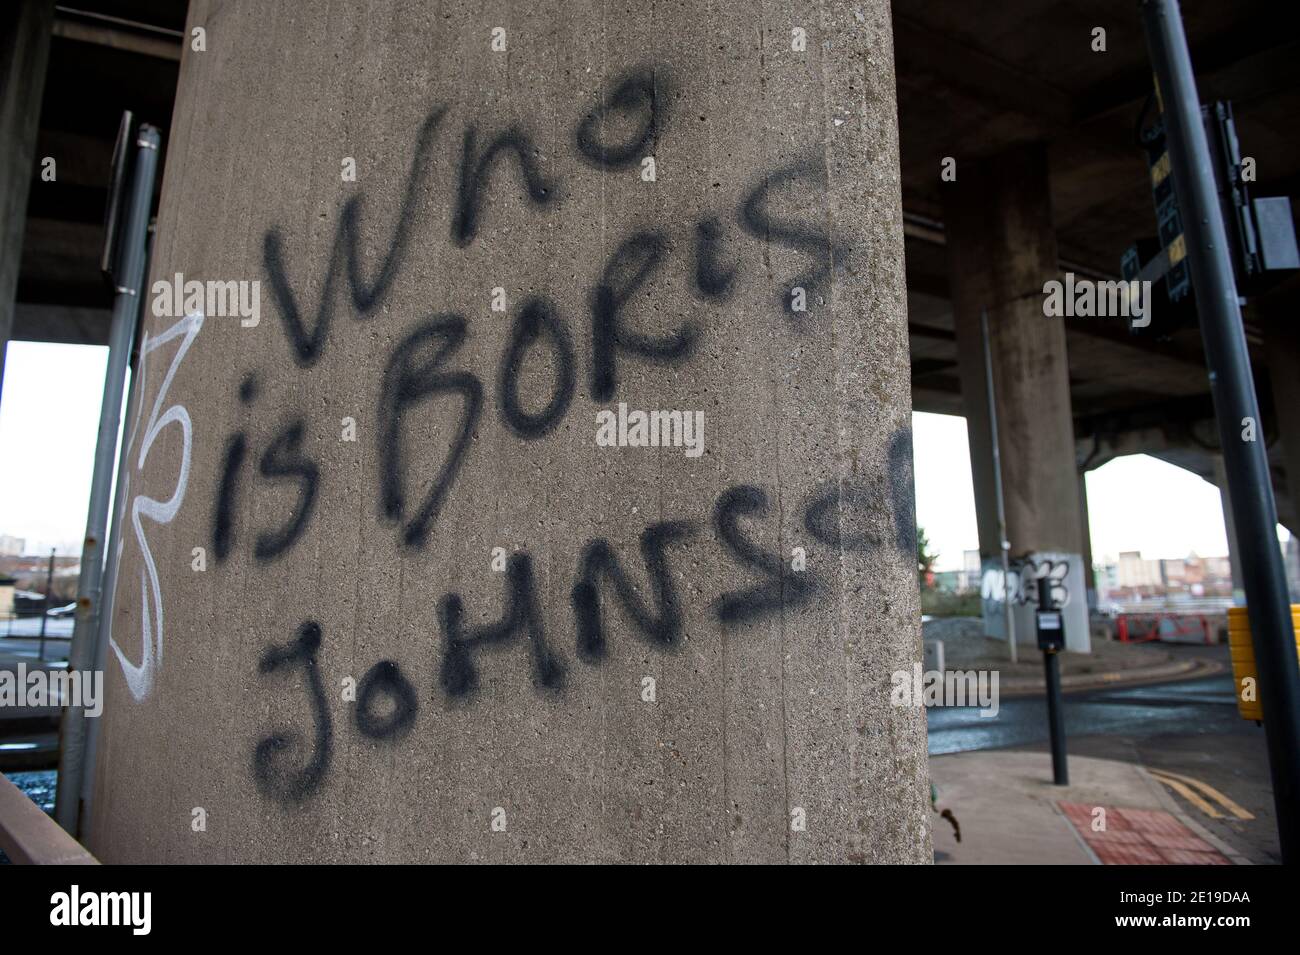 Glasgow, Scotland, UK. 5th Jan, 2021. Pictured: Either somebody has been living in a cave for a while or they are trying to make a point, their graffiti on the Kingston Bridge, “WHO IS Boris Johnson”. As of 00:01 this morning Scotland has been placed into another lockdown as per the Scottish First Minister's address at 2pm yesterday. Only essential travel is allowed such as going to work and essential food shopping and exercise, other than that everyone must stay in their homes. Credit: Colin Fisher/Alamy Live News Stock Photo